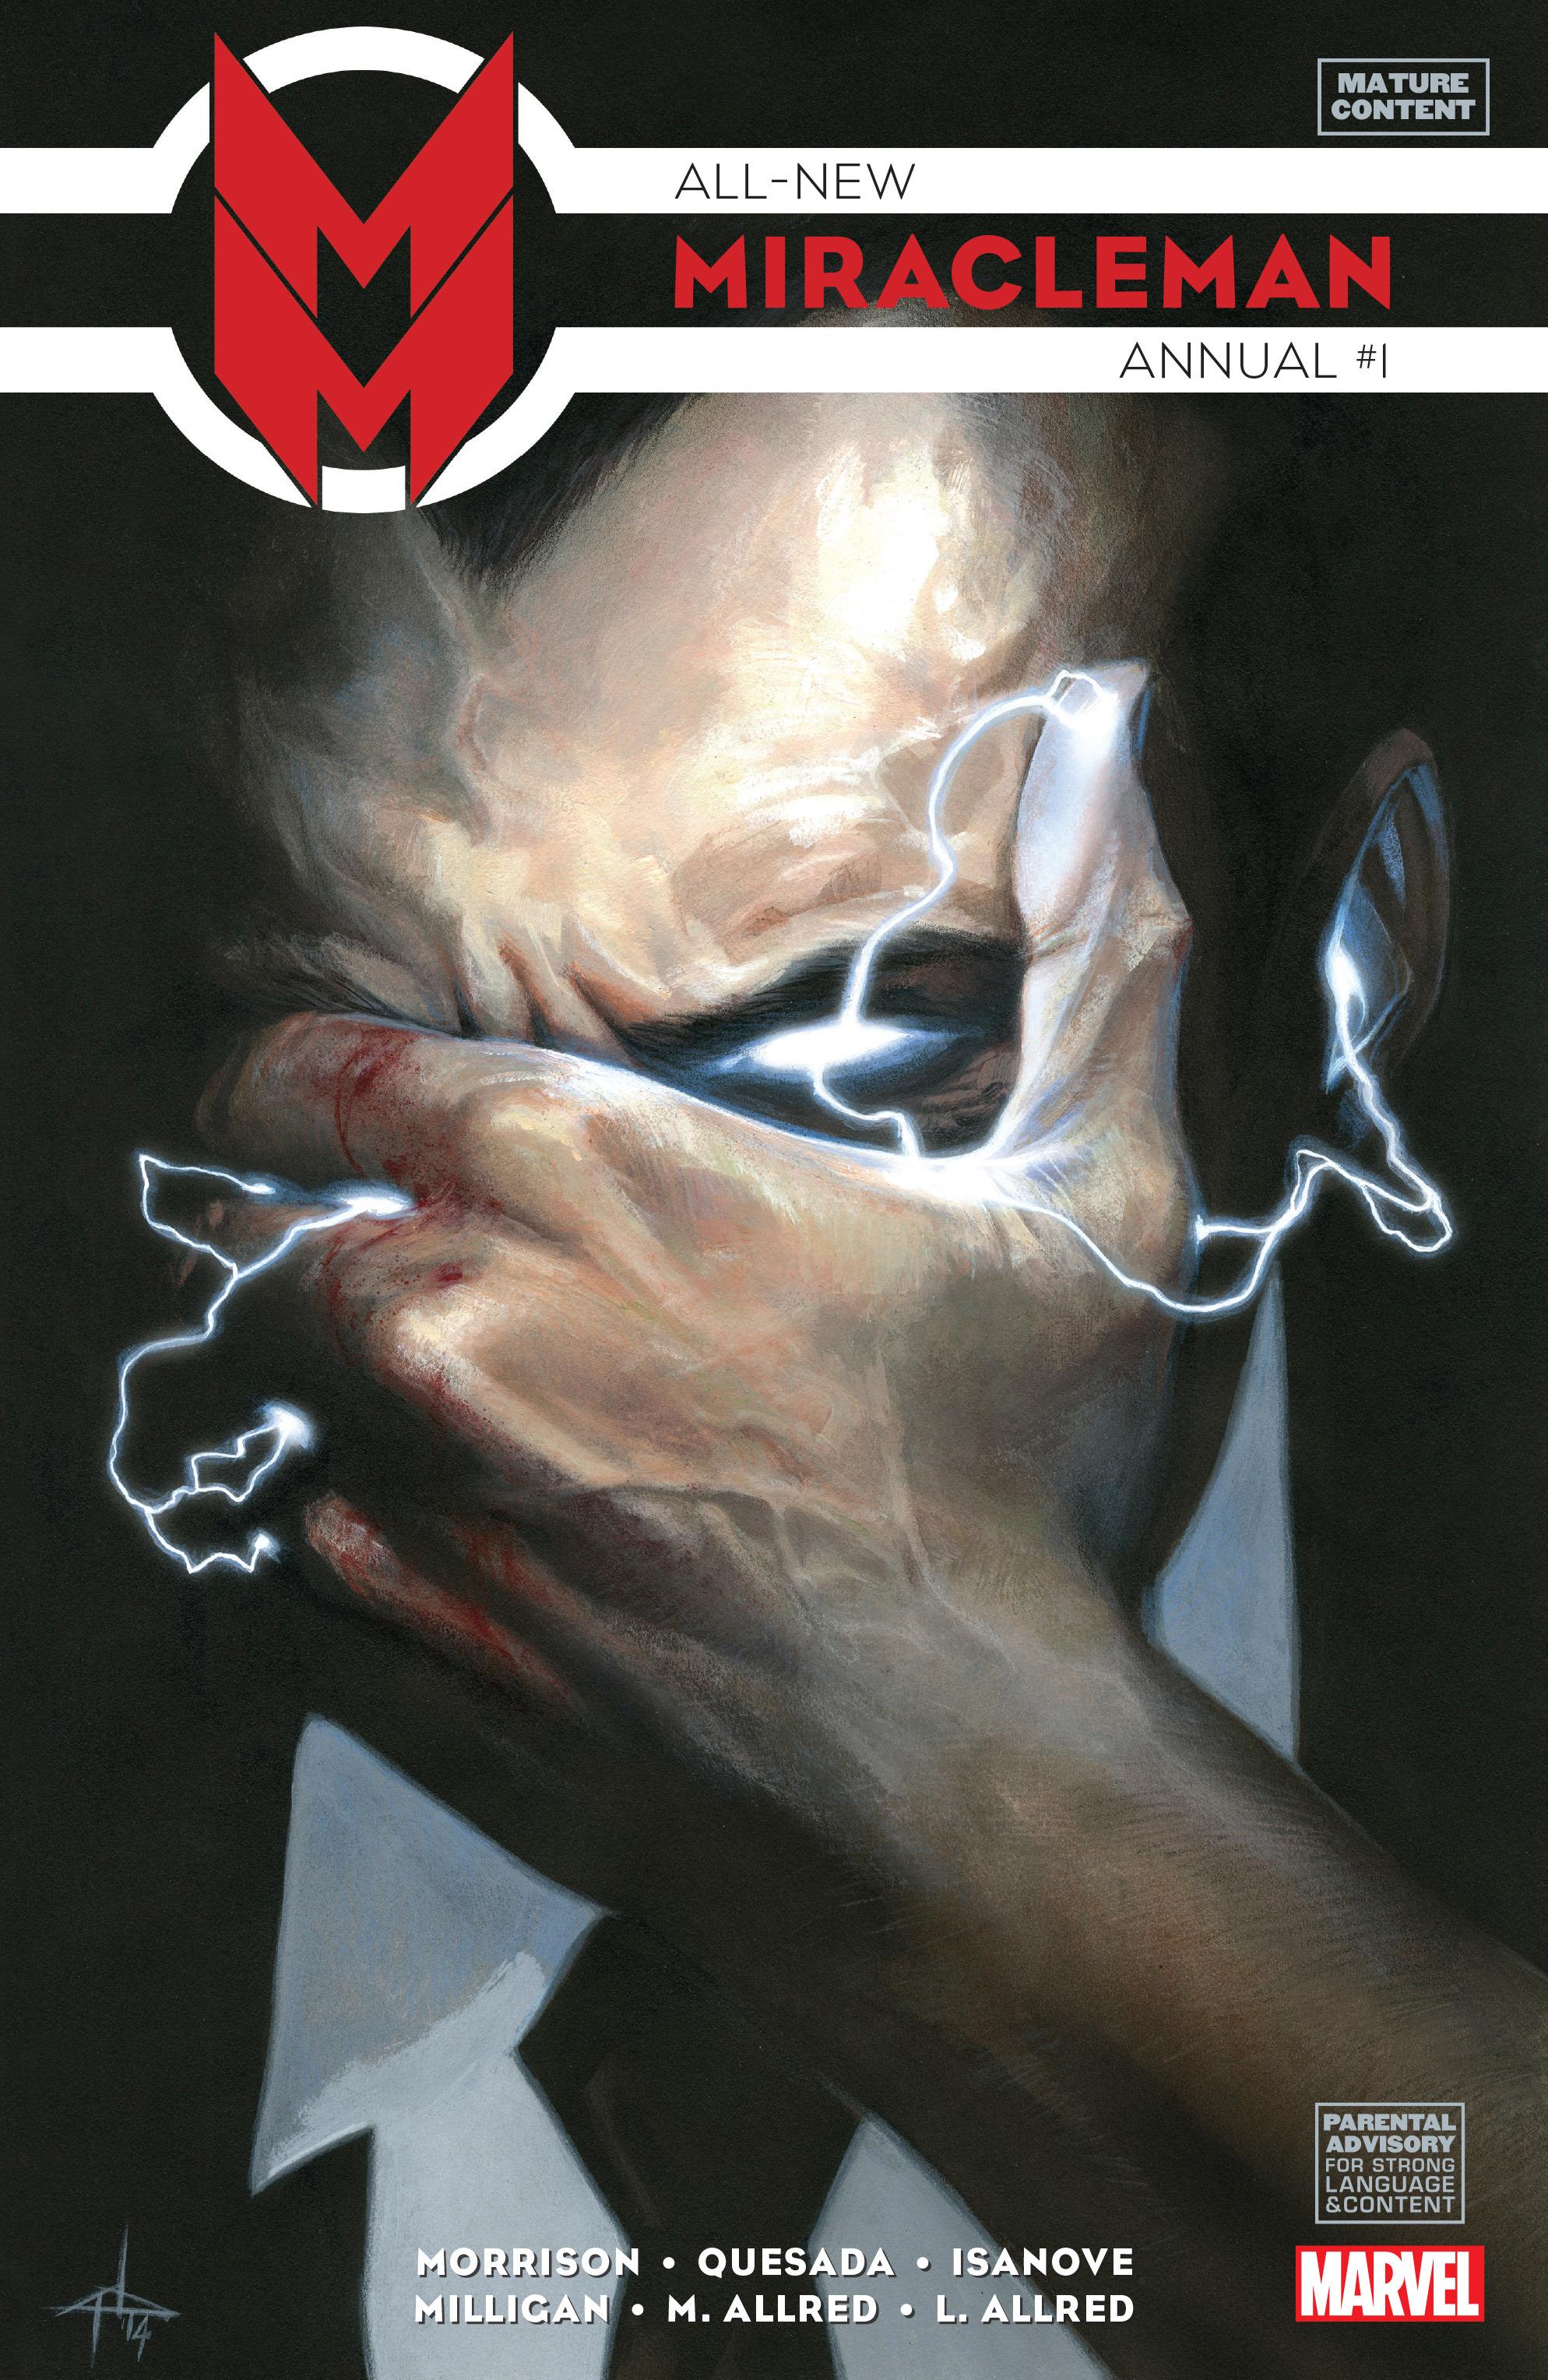 All-New Miracleman Vol. 1 #1